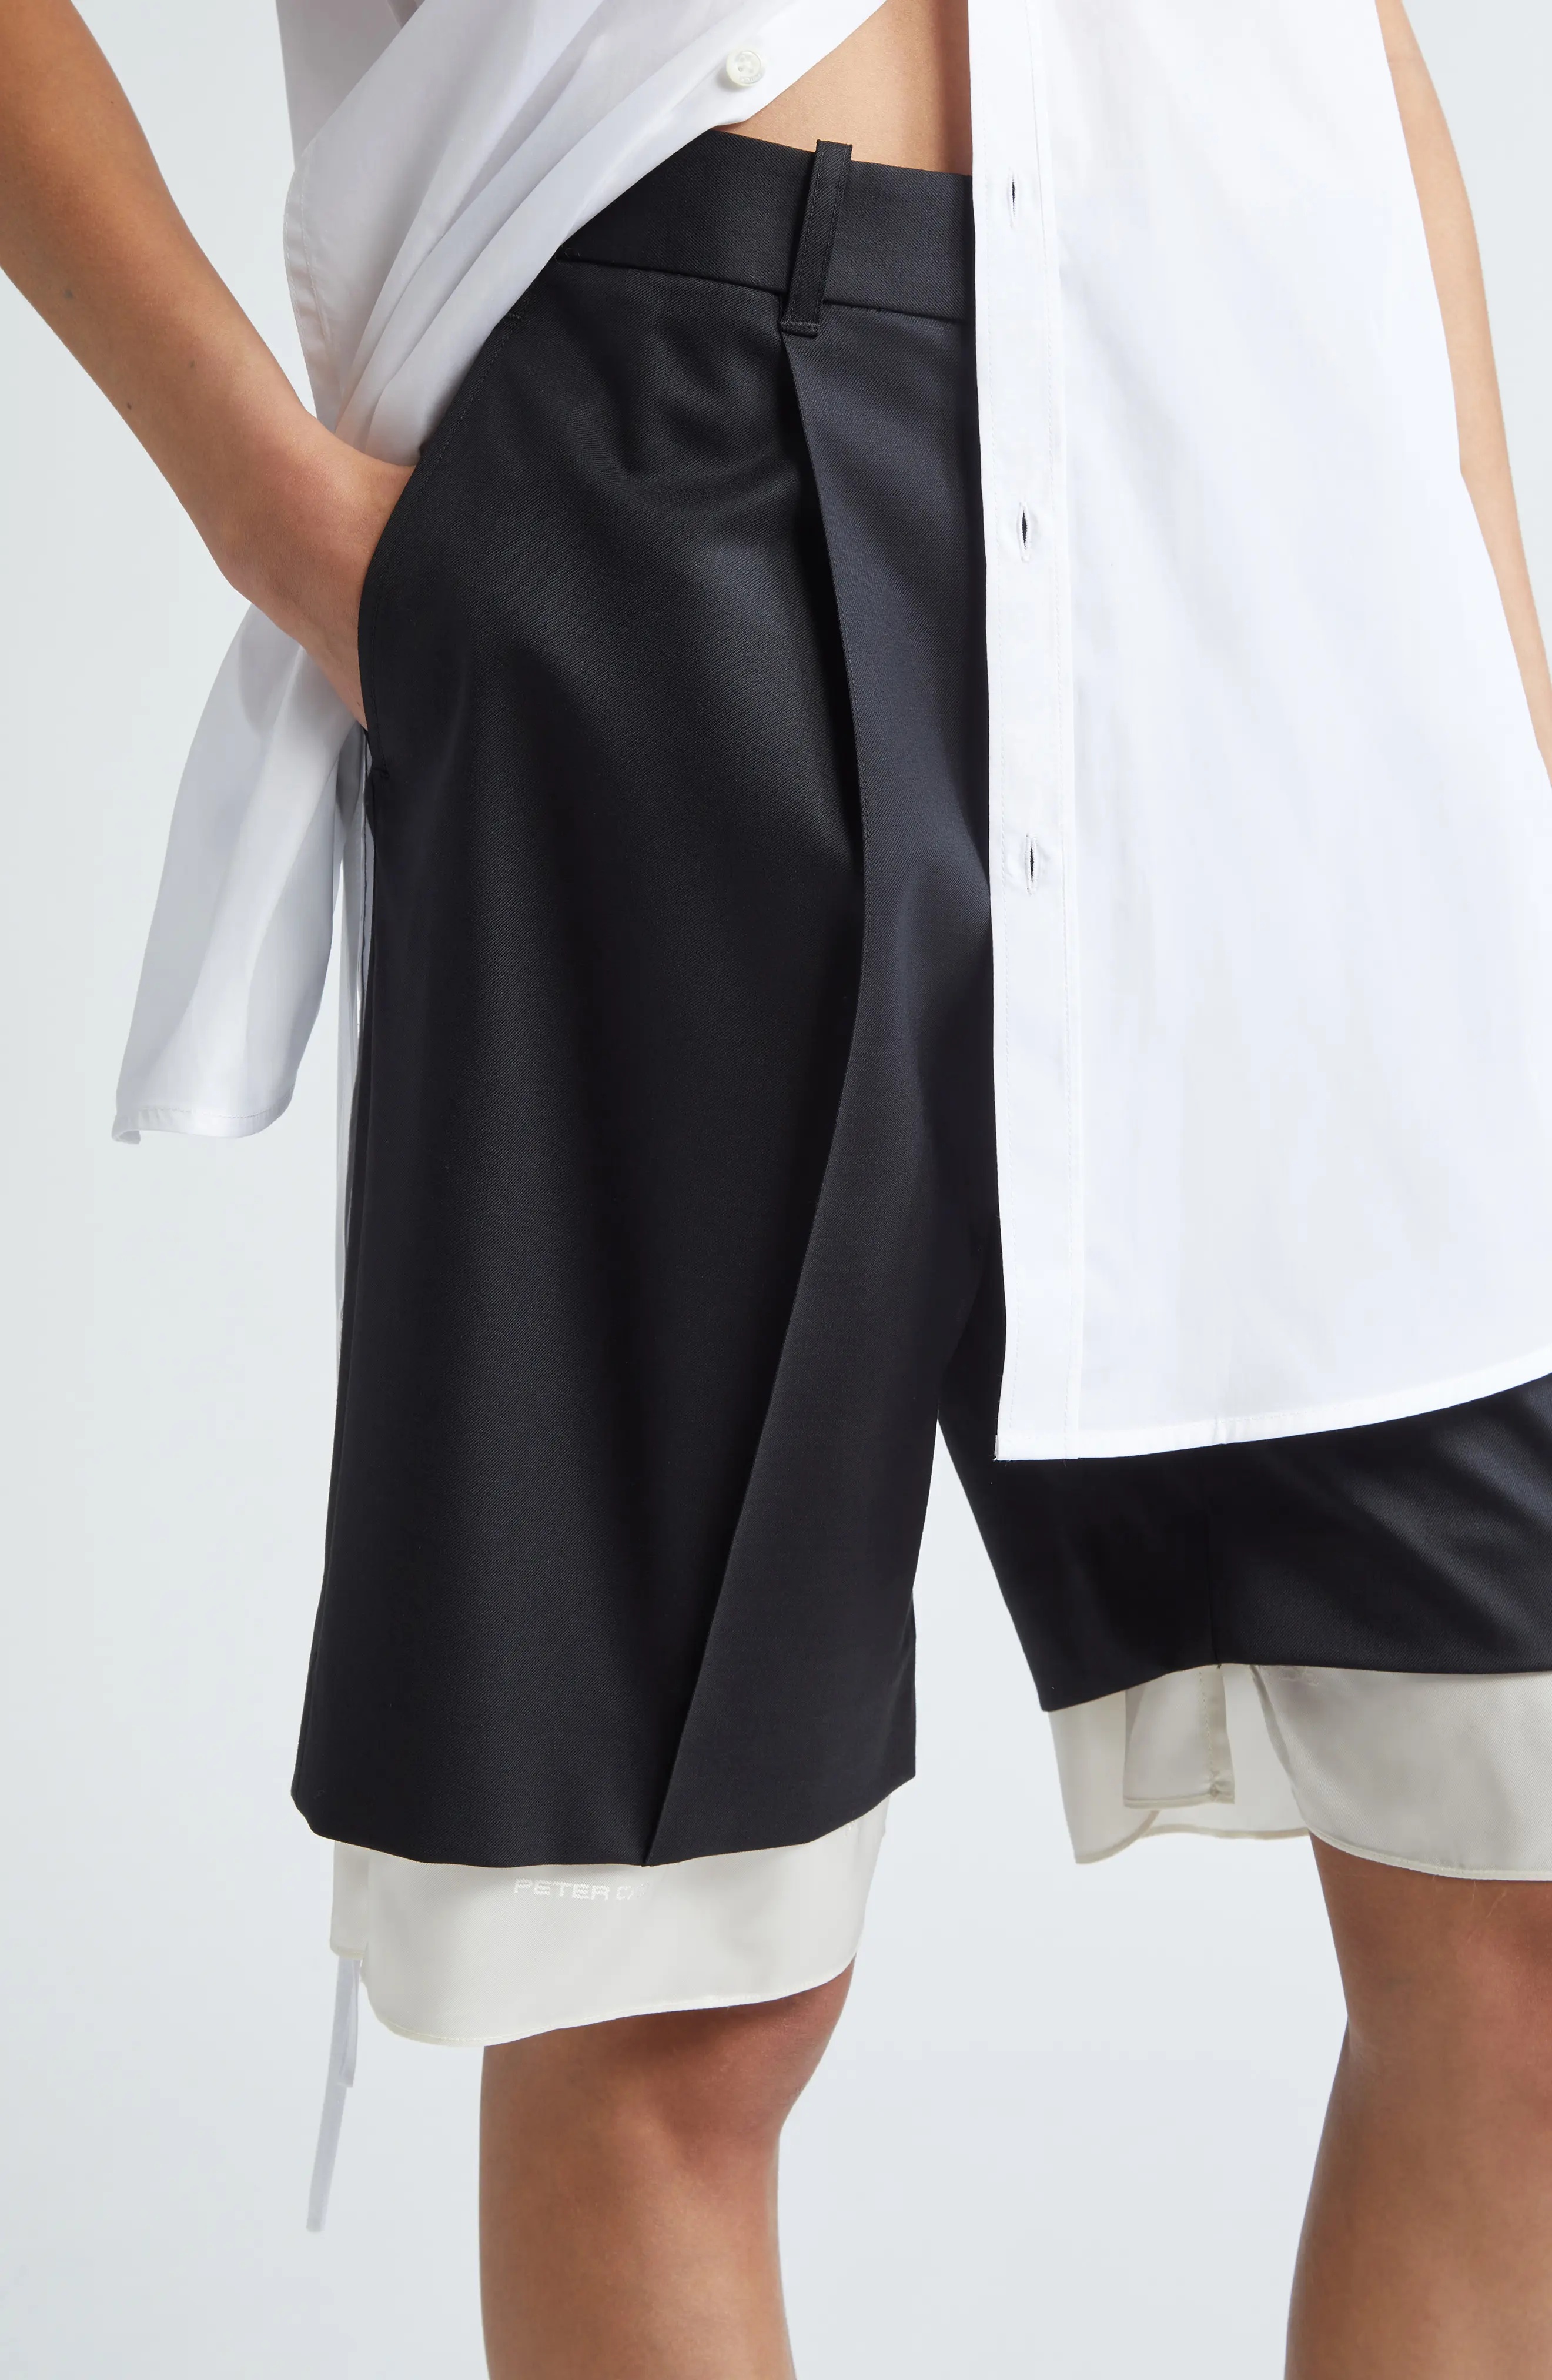 Peekaboo Lining Tailored Stretch Wool Shorts in Black/Ivory - 5